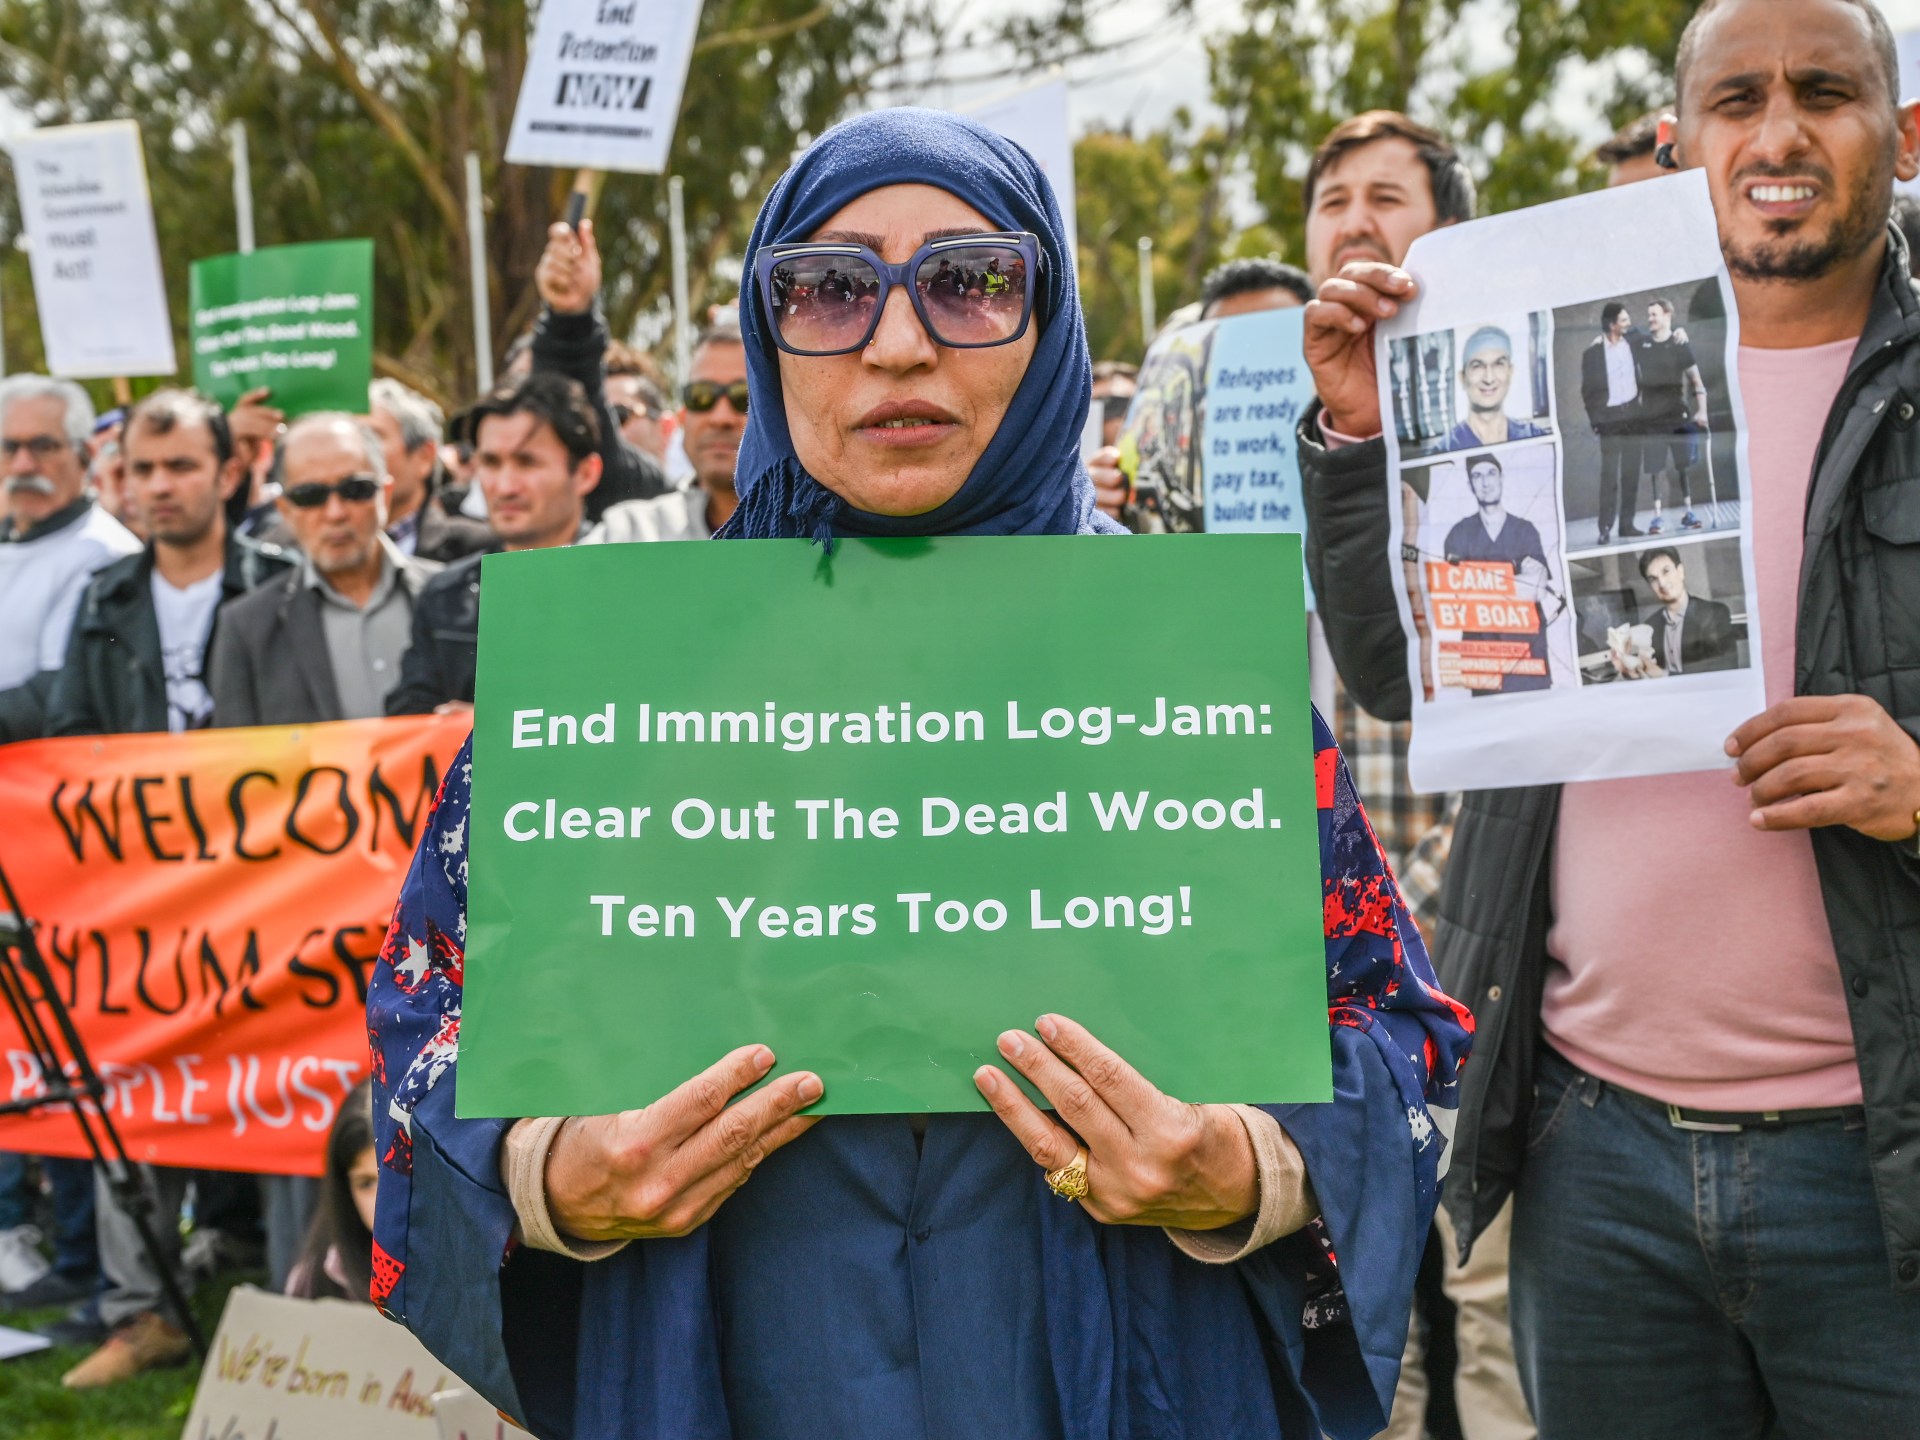 ‘Too much’: Refugees rally for permanent visas in Australia | Refugees News